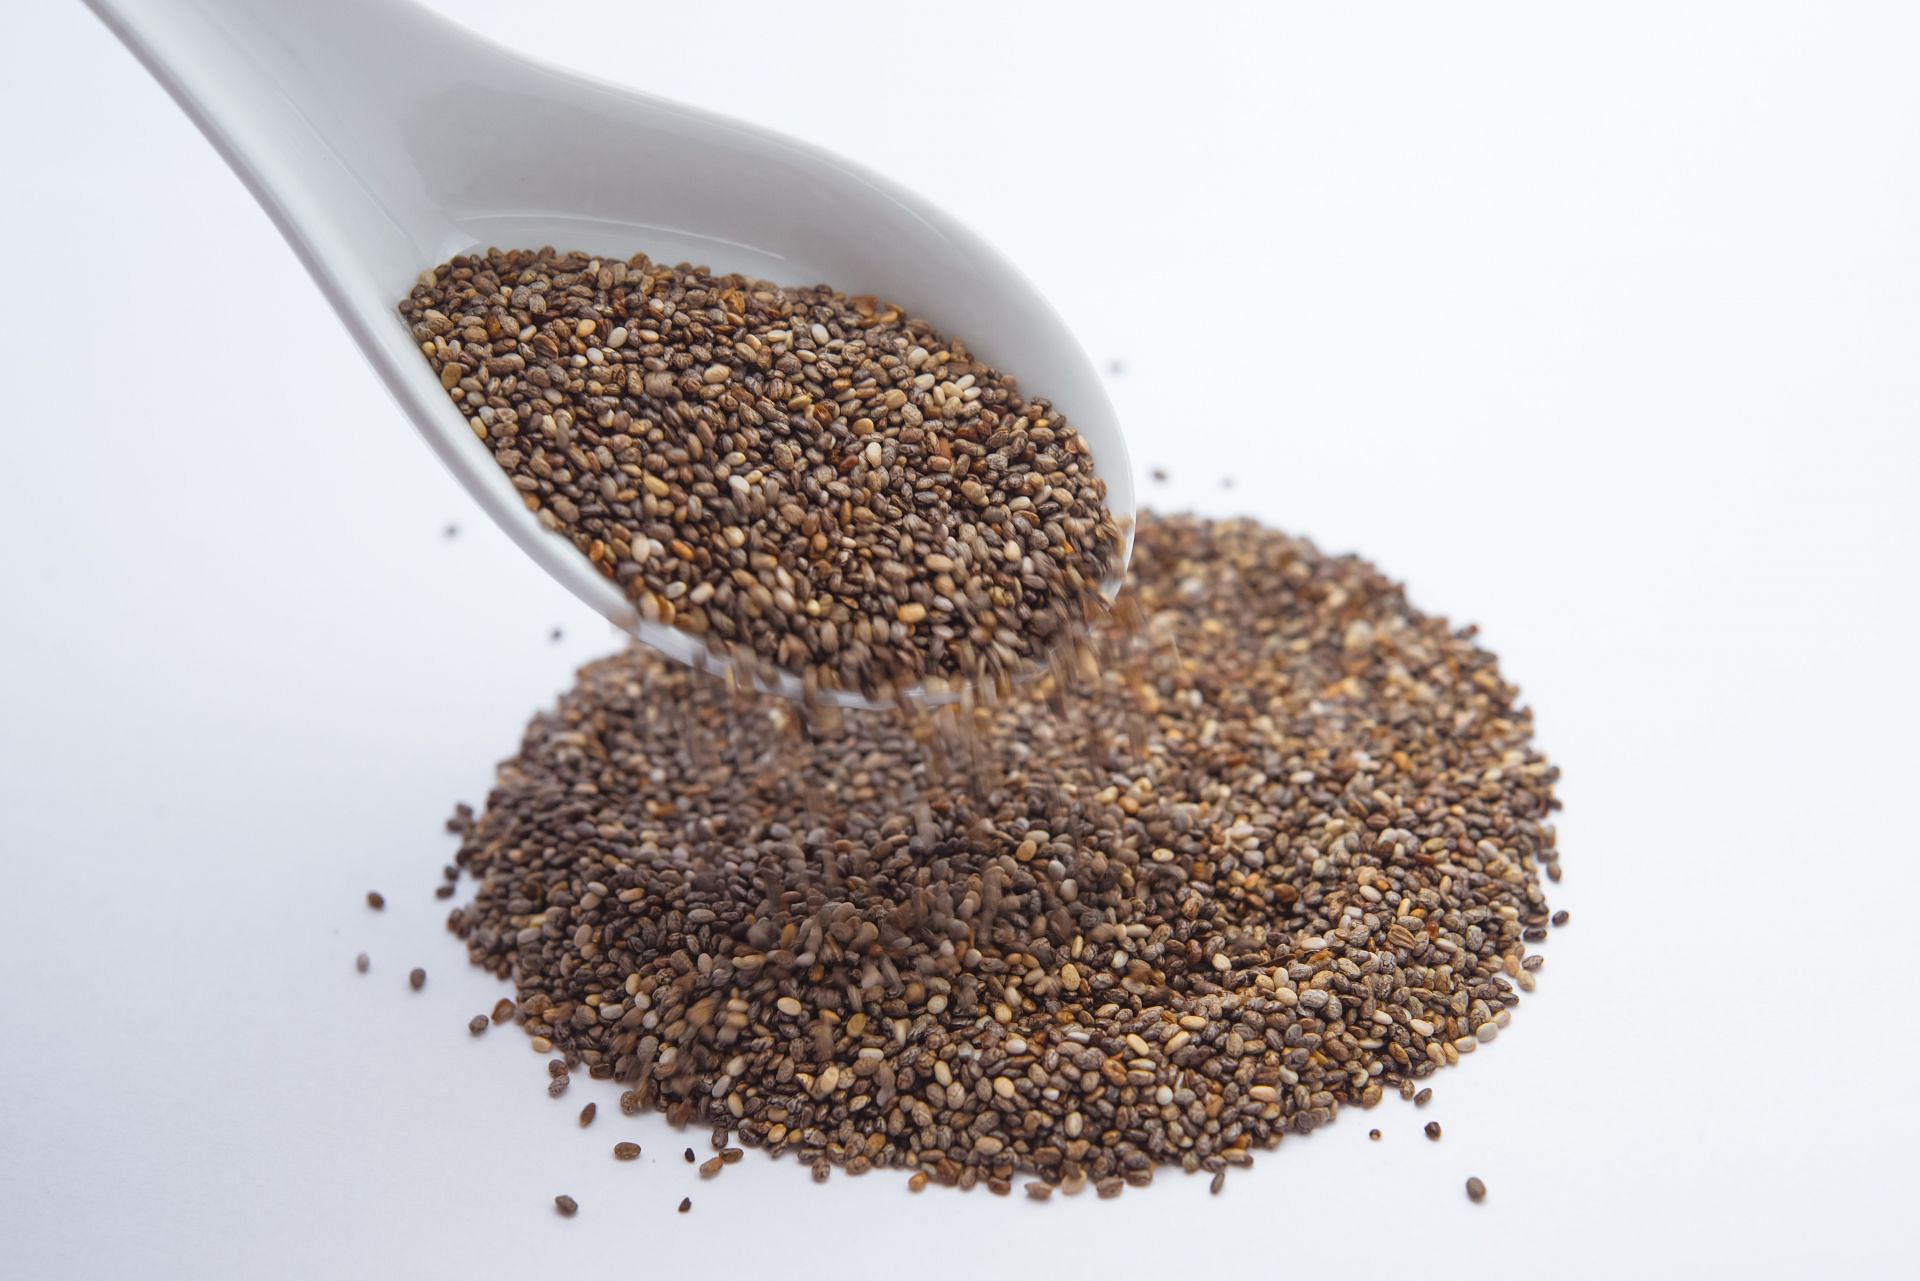 Foods for hair growth: Chia seeds are a great source of omega-3. (Image via Pexels / Bruno Scramgnon)